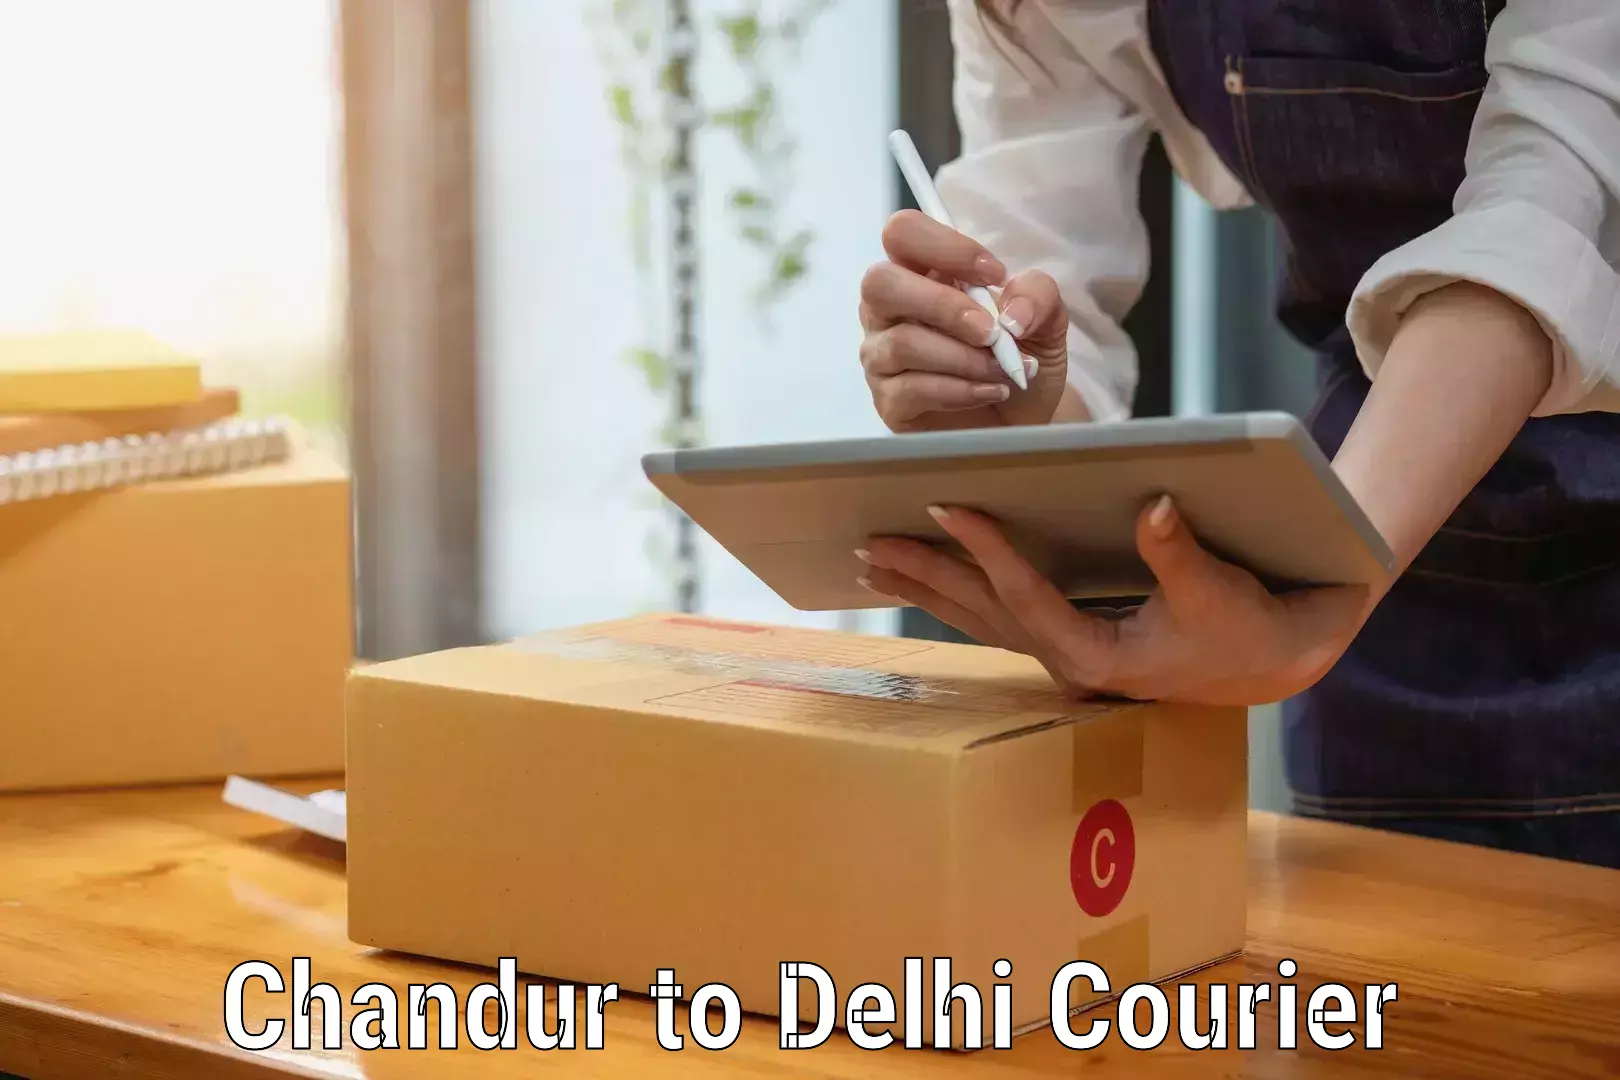 Quality relocation services in Chandur to Delhi